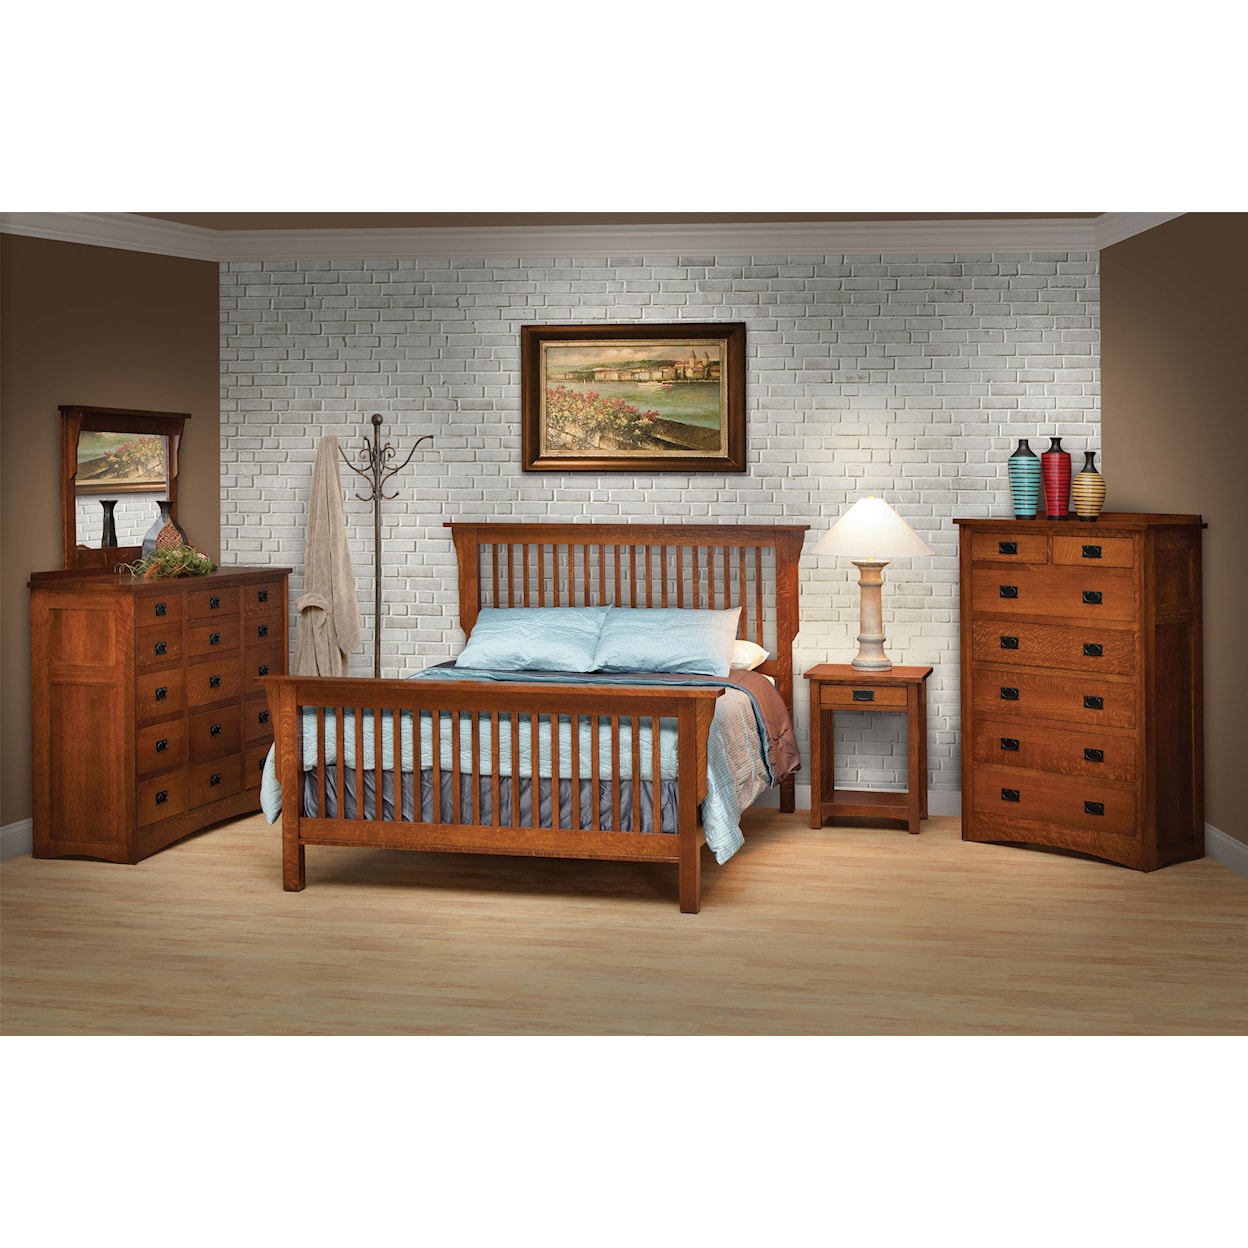 Daniels Amish Mission Twin Bedroom Group